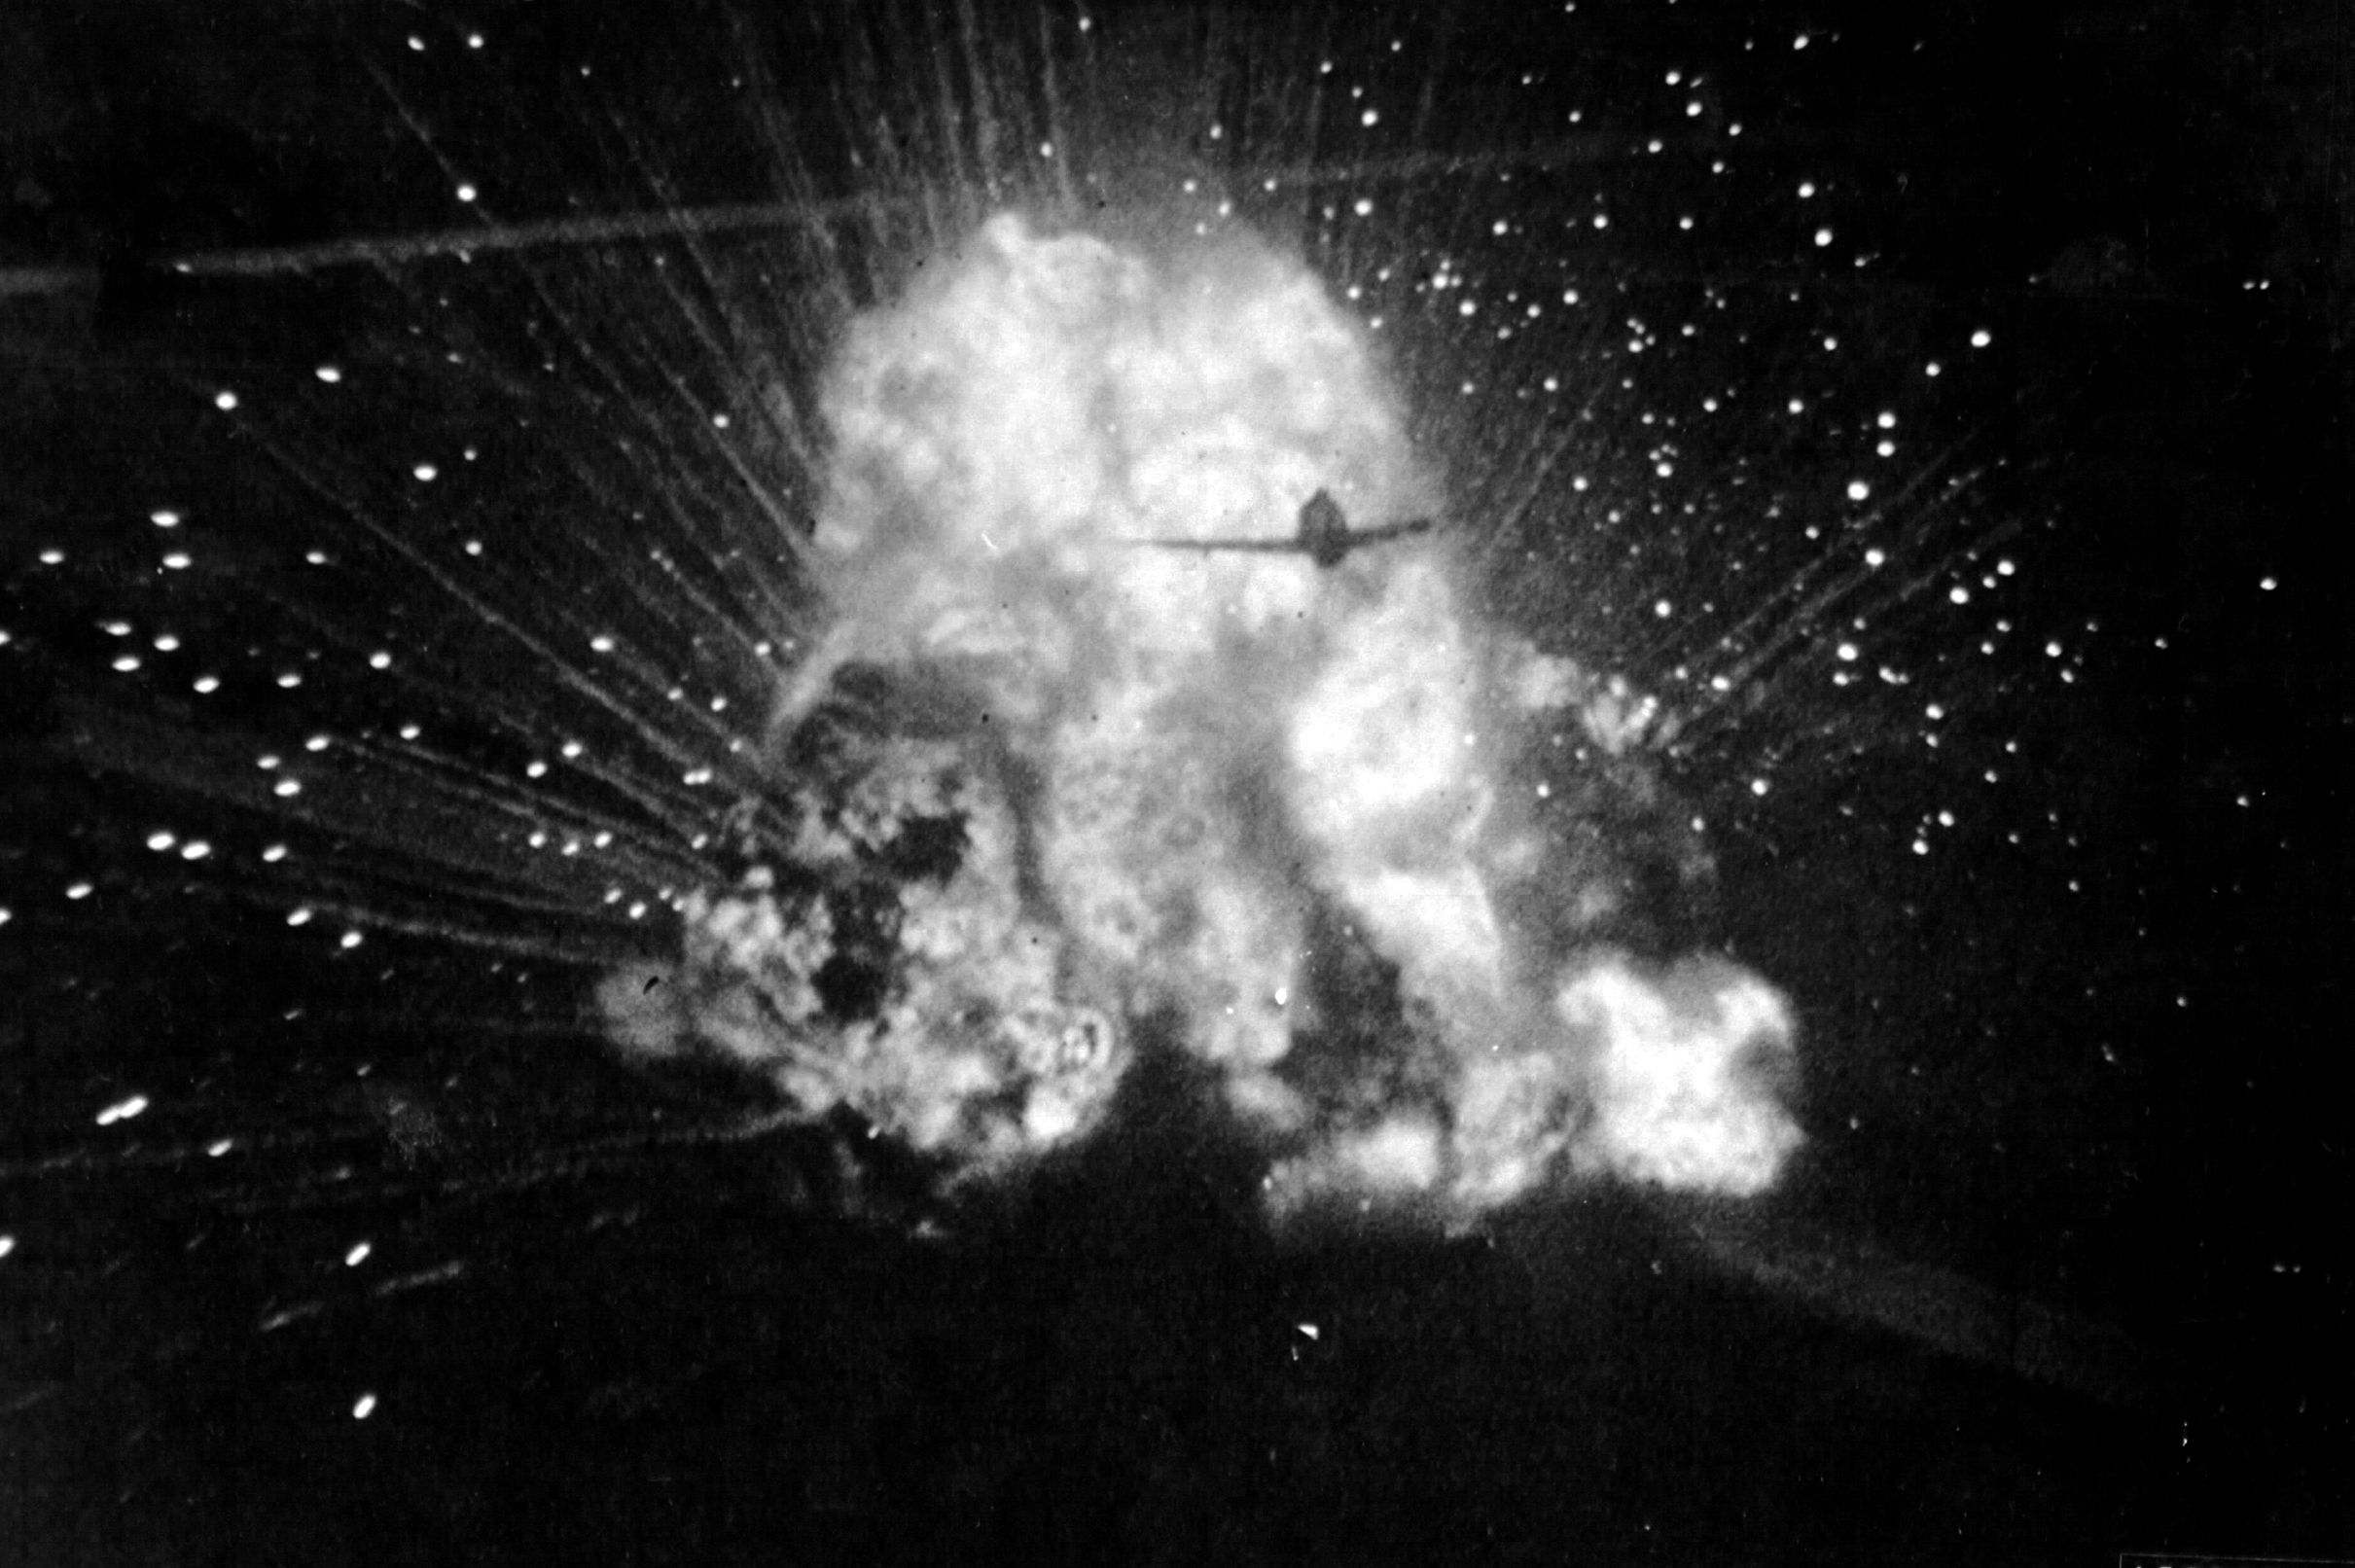 A P-47 Thunderbolt from 406th Fighter Group silhouetted against an exploding ammunition truck as the pilot strafes ground targets in France on June 23, 1944.